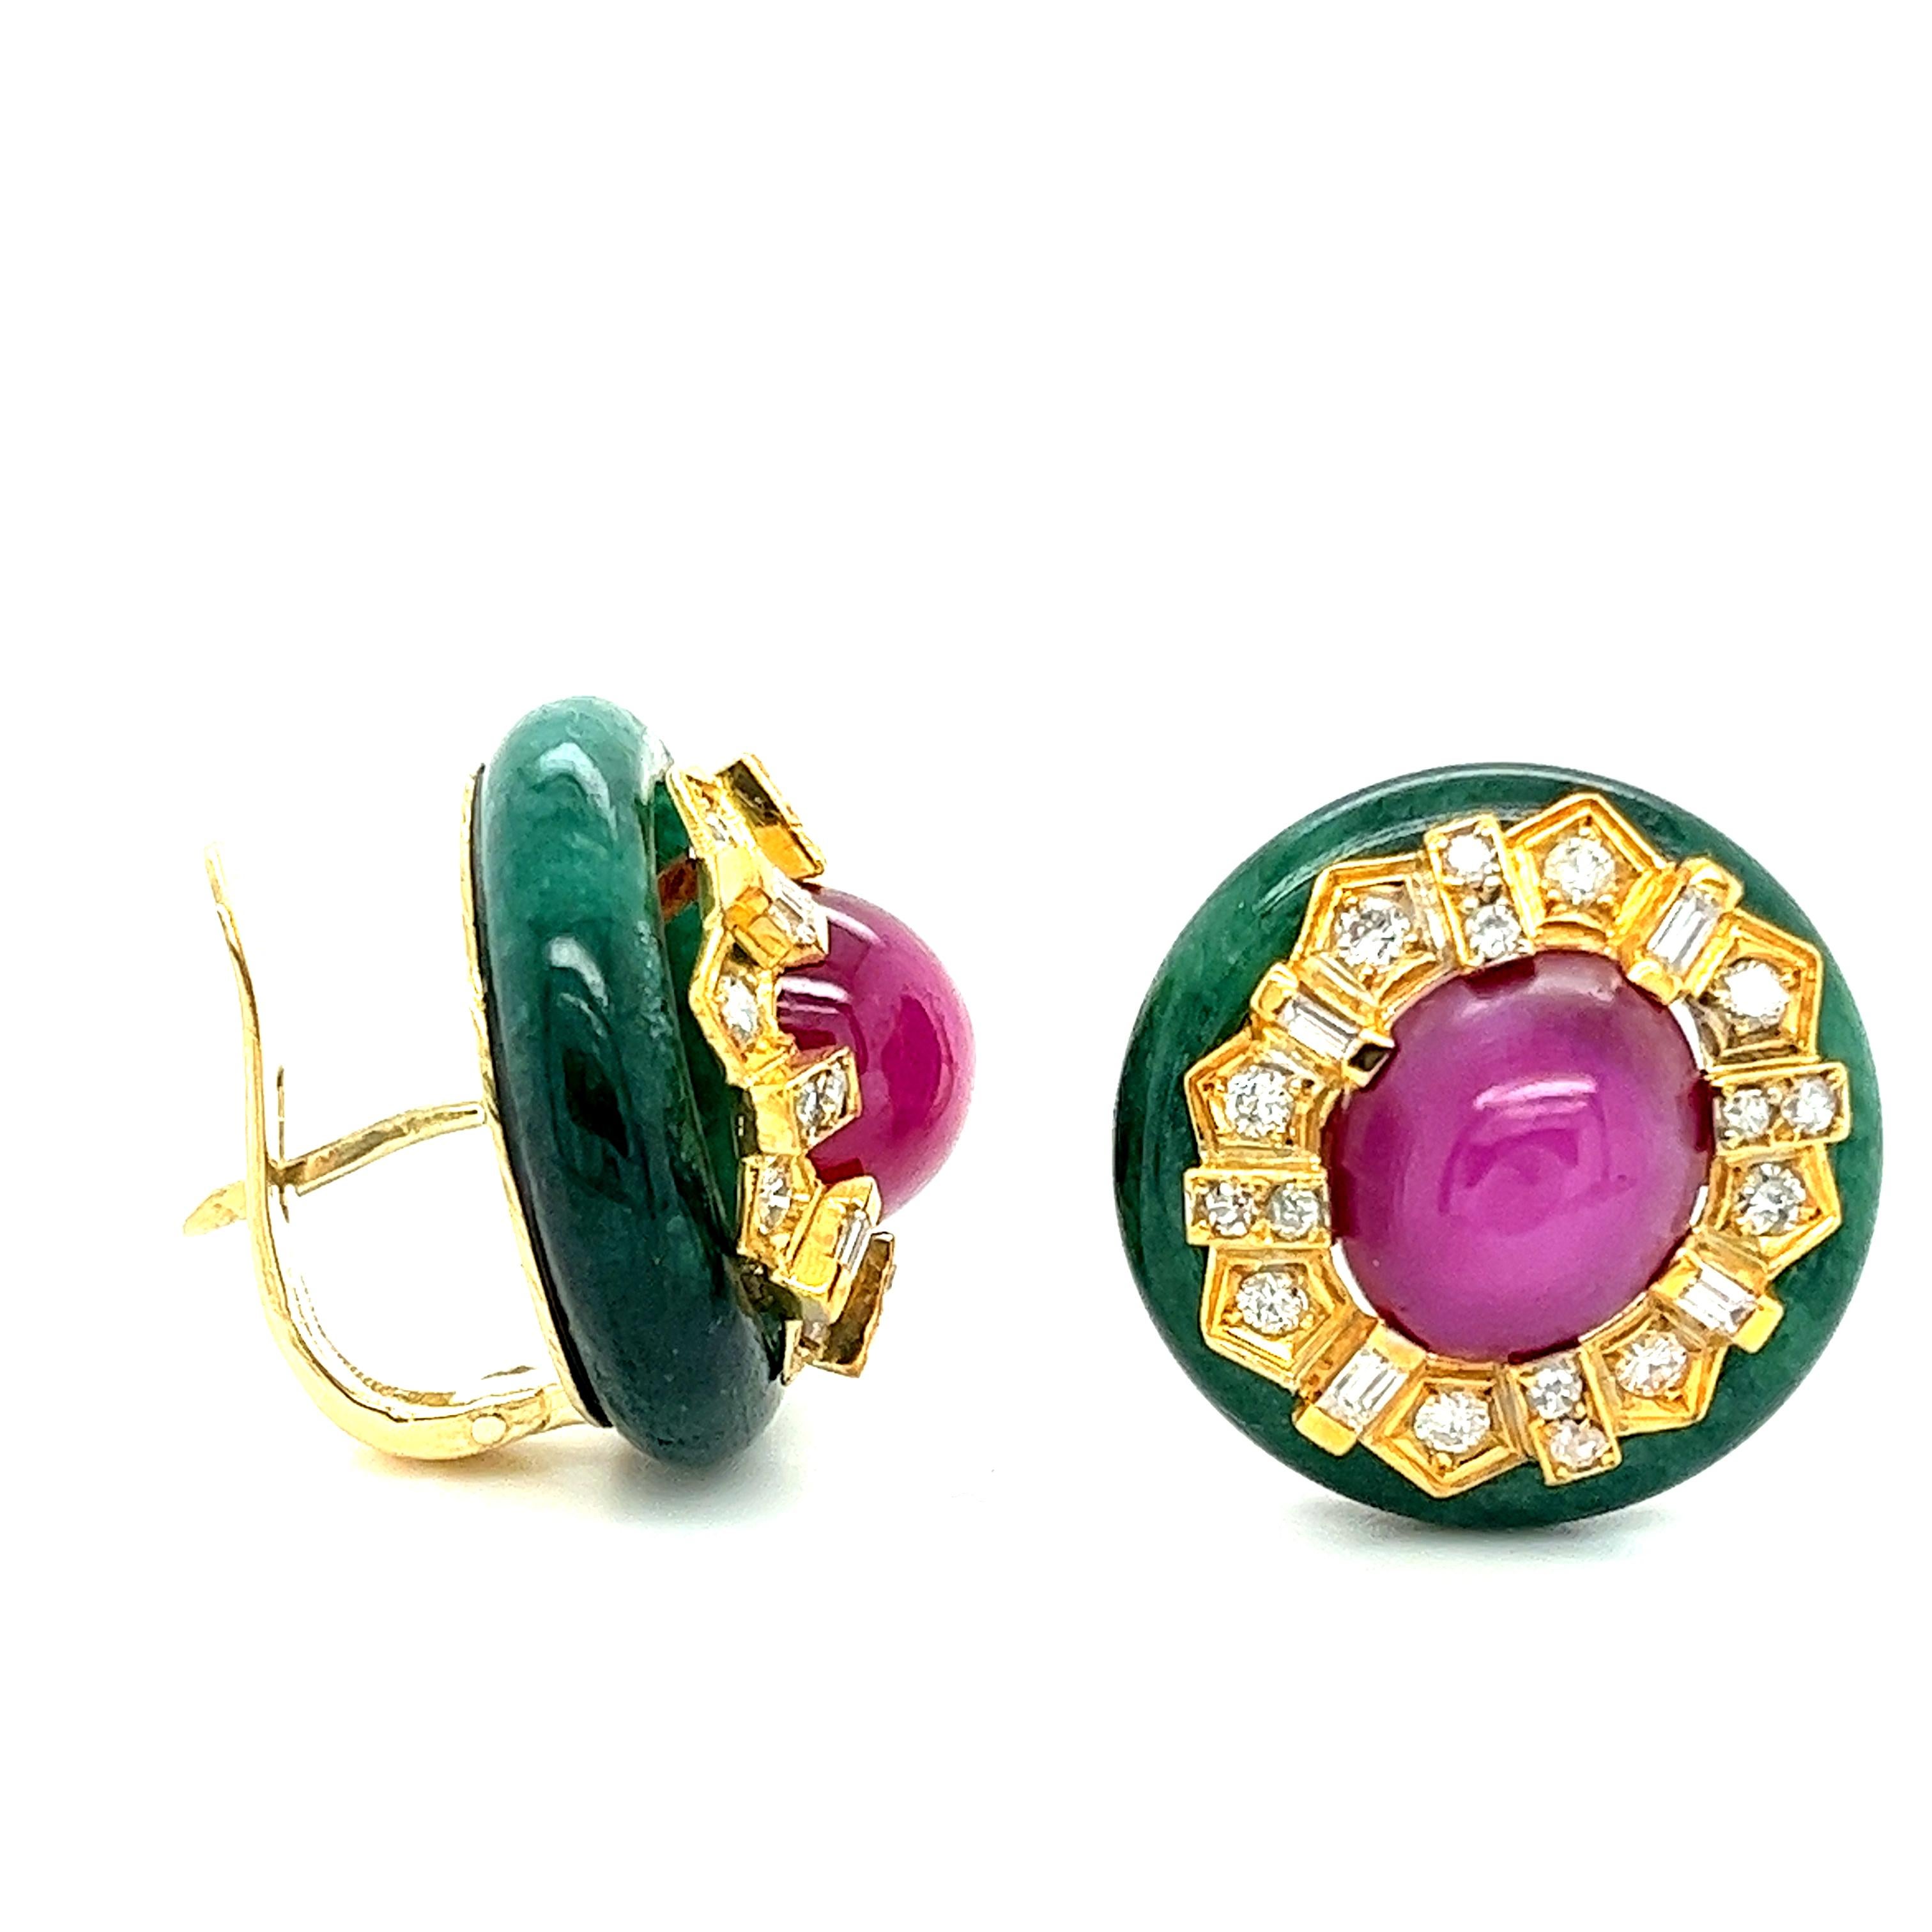 18K Yellow Gold Ruby, Jade and Diamond Ring and Earring Set:

Set in 30.2g of 18K Yellow Gold (17.2g earrings, 13g ring), centering three cabochon-cut rubies (30ct total), and adorned by Jade and white diamonds.

*PLEASE NOTE* 
Rubies have not been